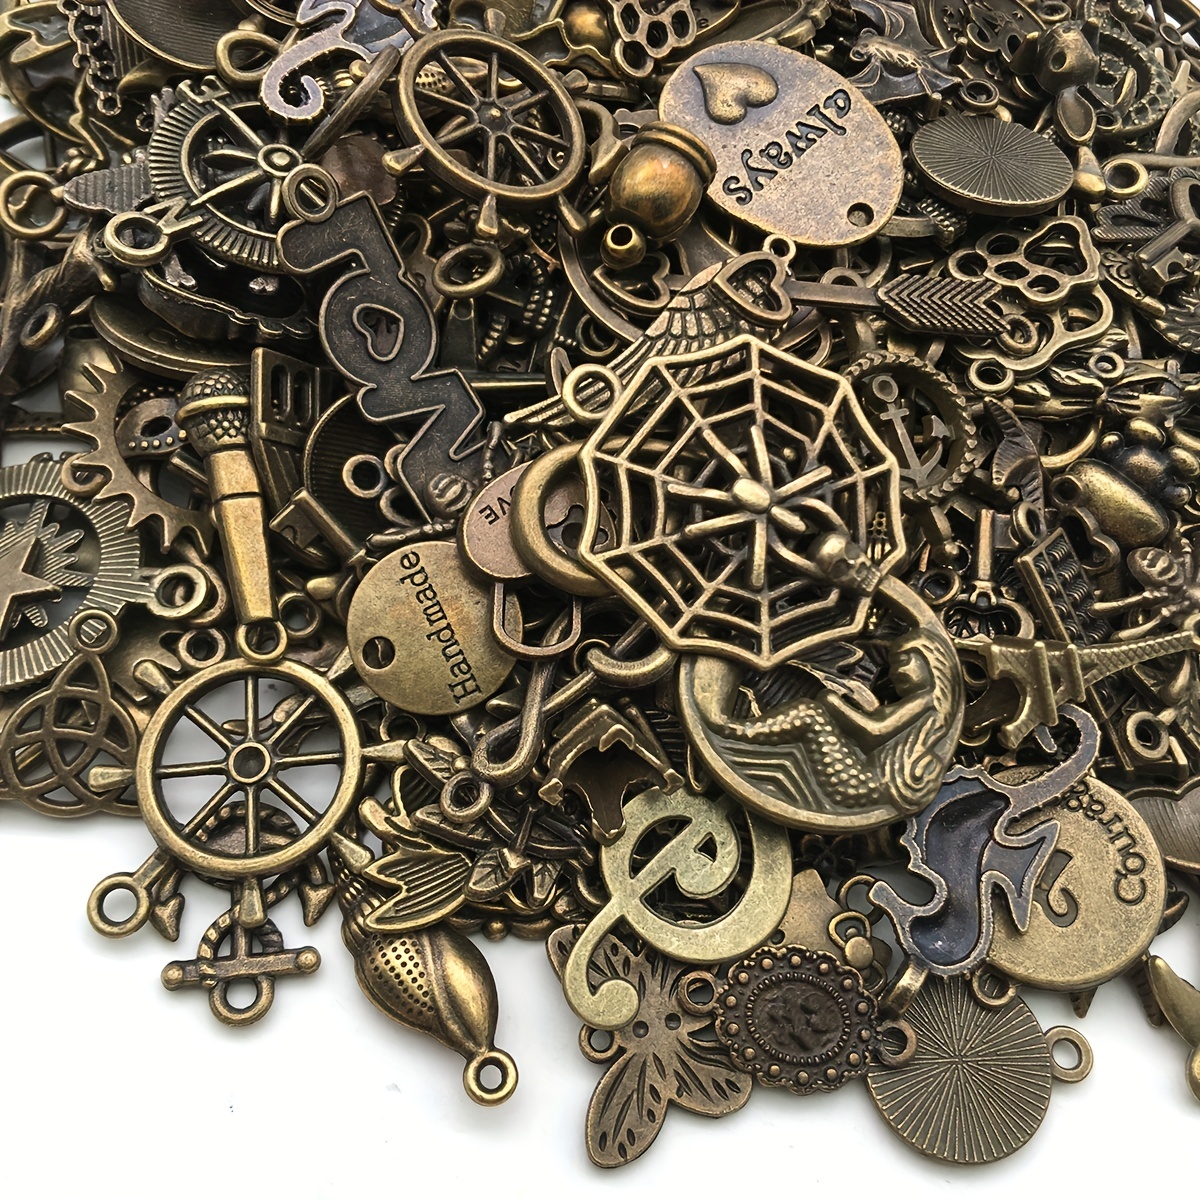 Vintage Charms Bulk,200pcs Mixed Antique Charms Tibetan Alloy Pendants for Necklace Bracelet Jewelry Making and Crafting,Antique Silver & Gold